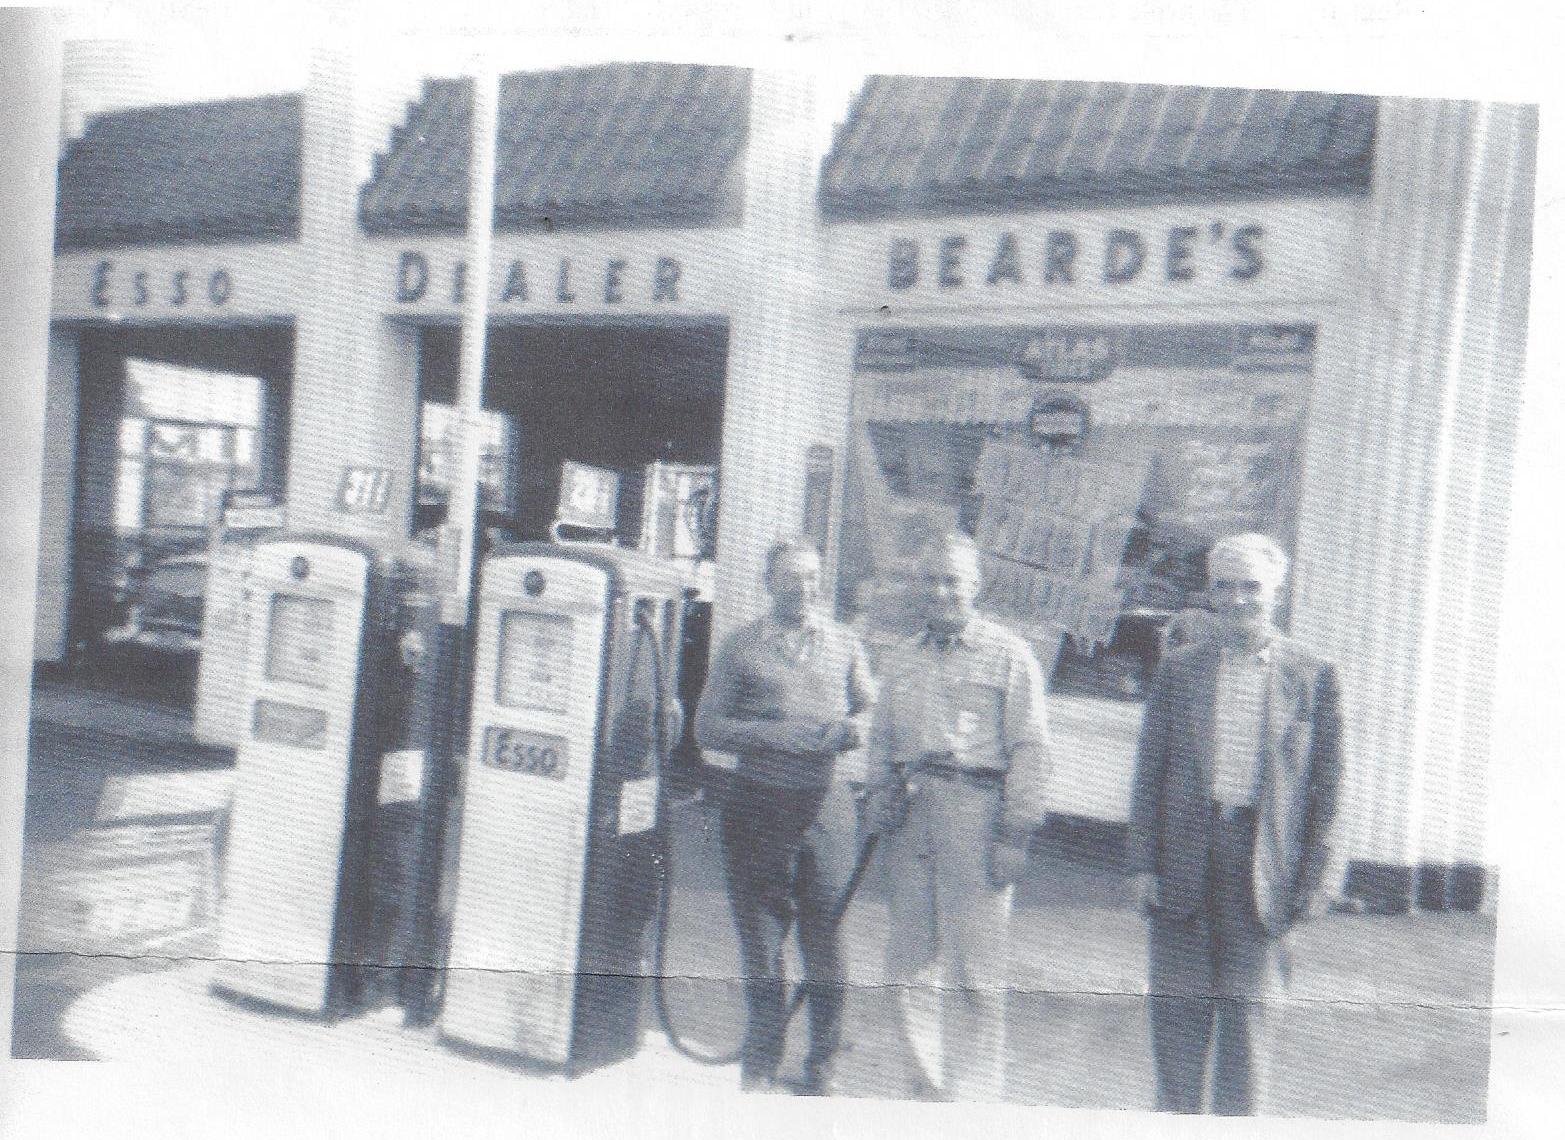 Jim Bearde and Sons: A 60-Year Legacy